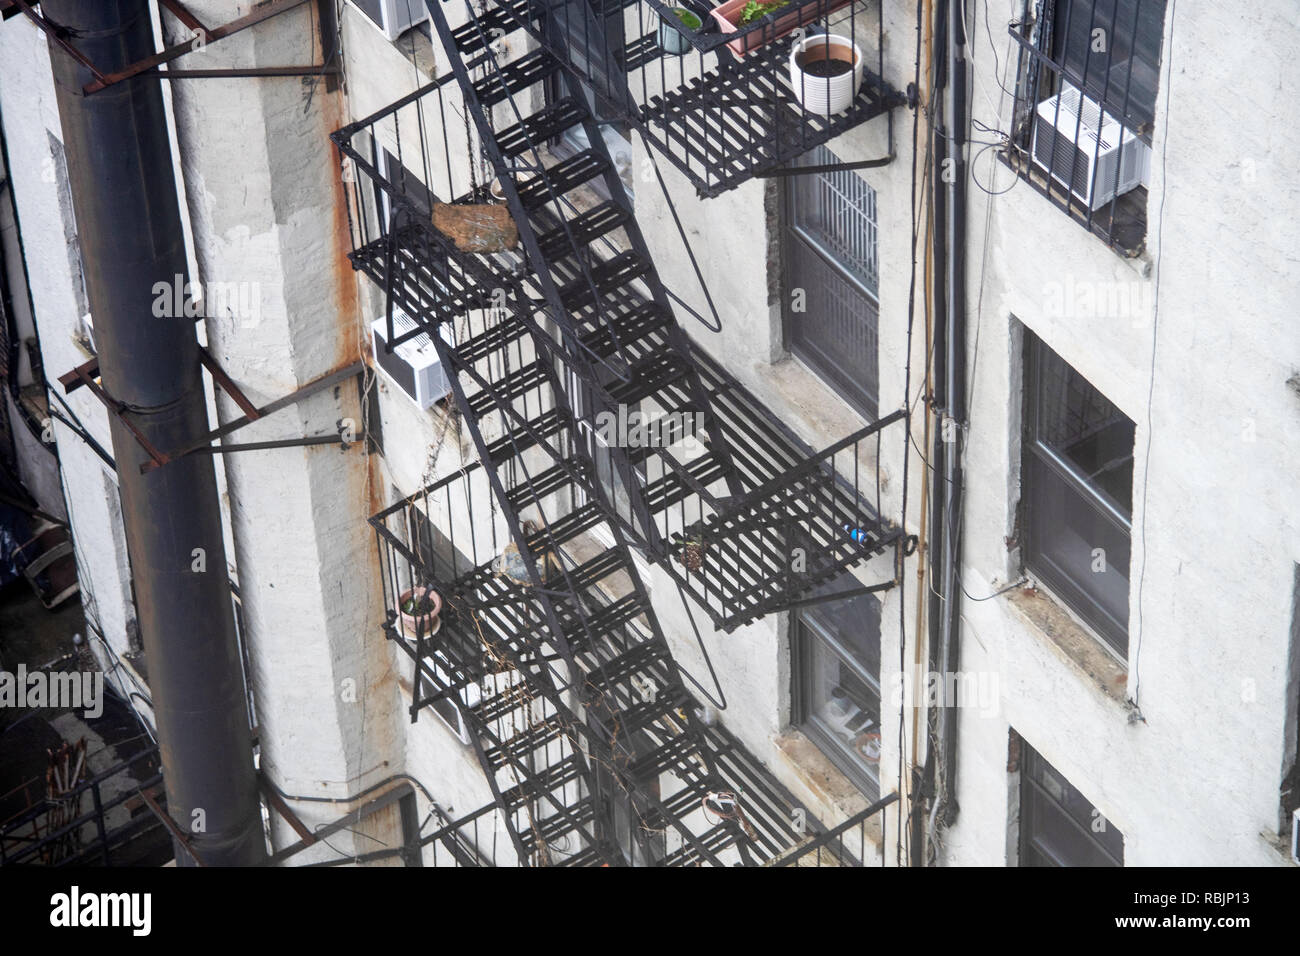 New-York building facades with fire escape stairs view from above Stock Photo